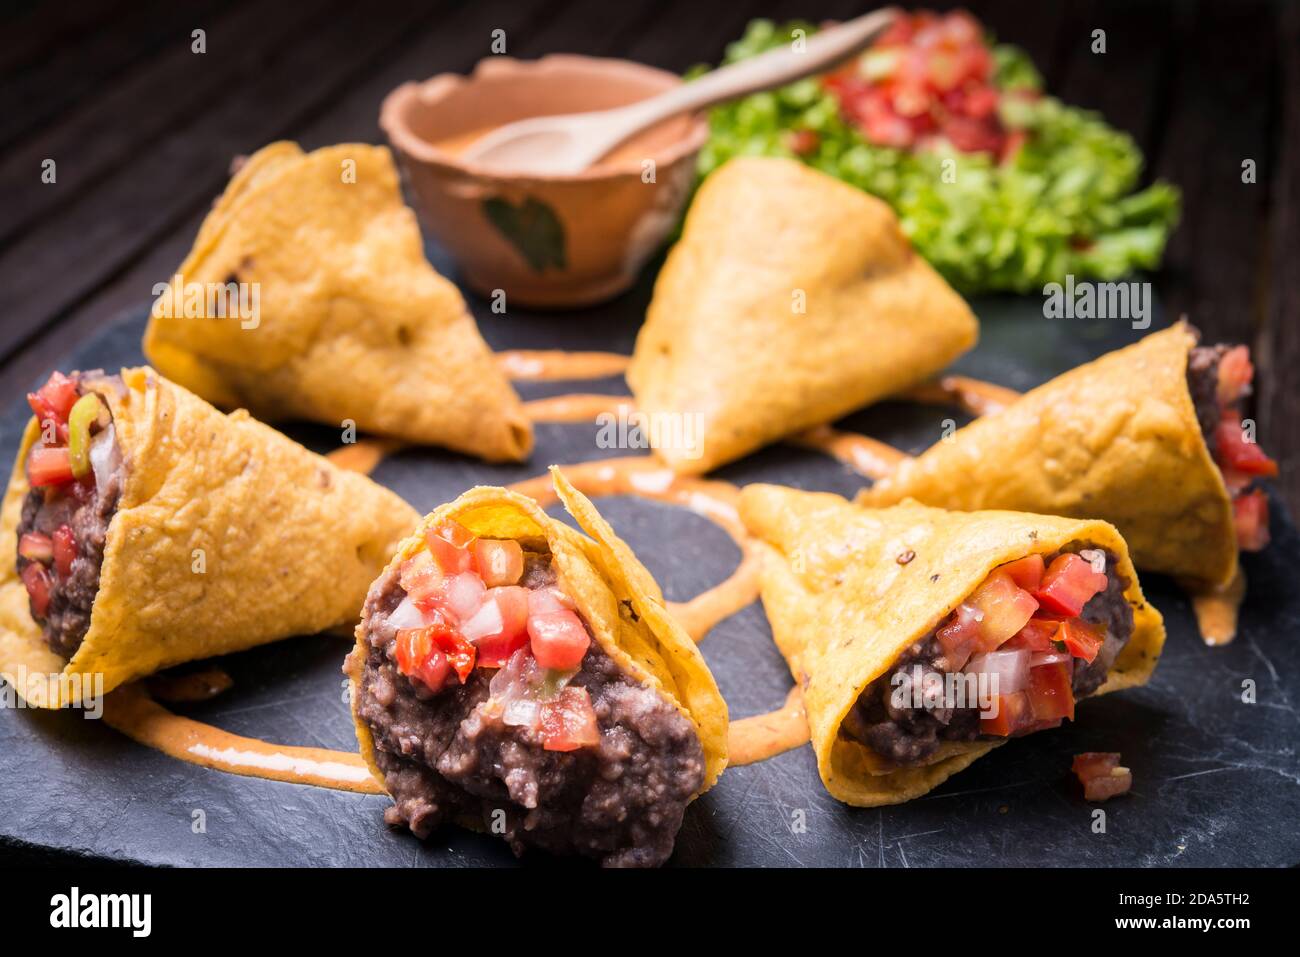 Mexican style tacos Stock Photo